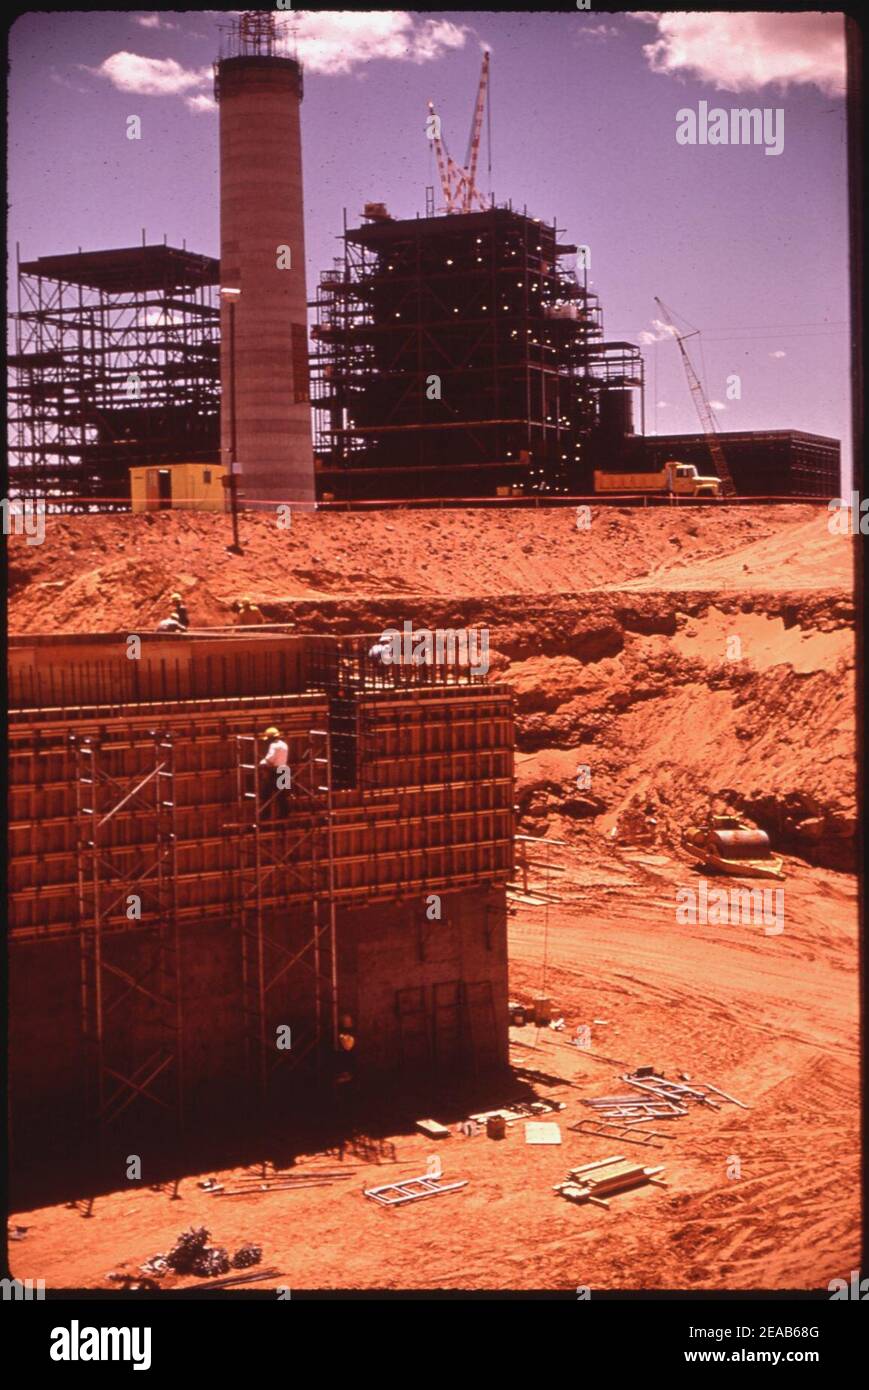 Navajo Generating Plant Under Construction. Occupying over a Thousand Acres Leased From the Navajo Indians, the Plant Will Be the Largest Electric Generating Station in Arizona (4266496326). Stock Photo